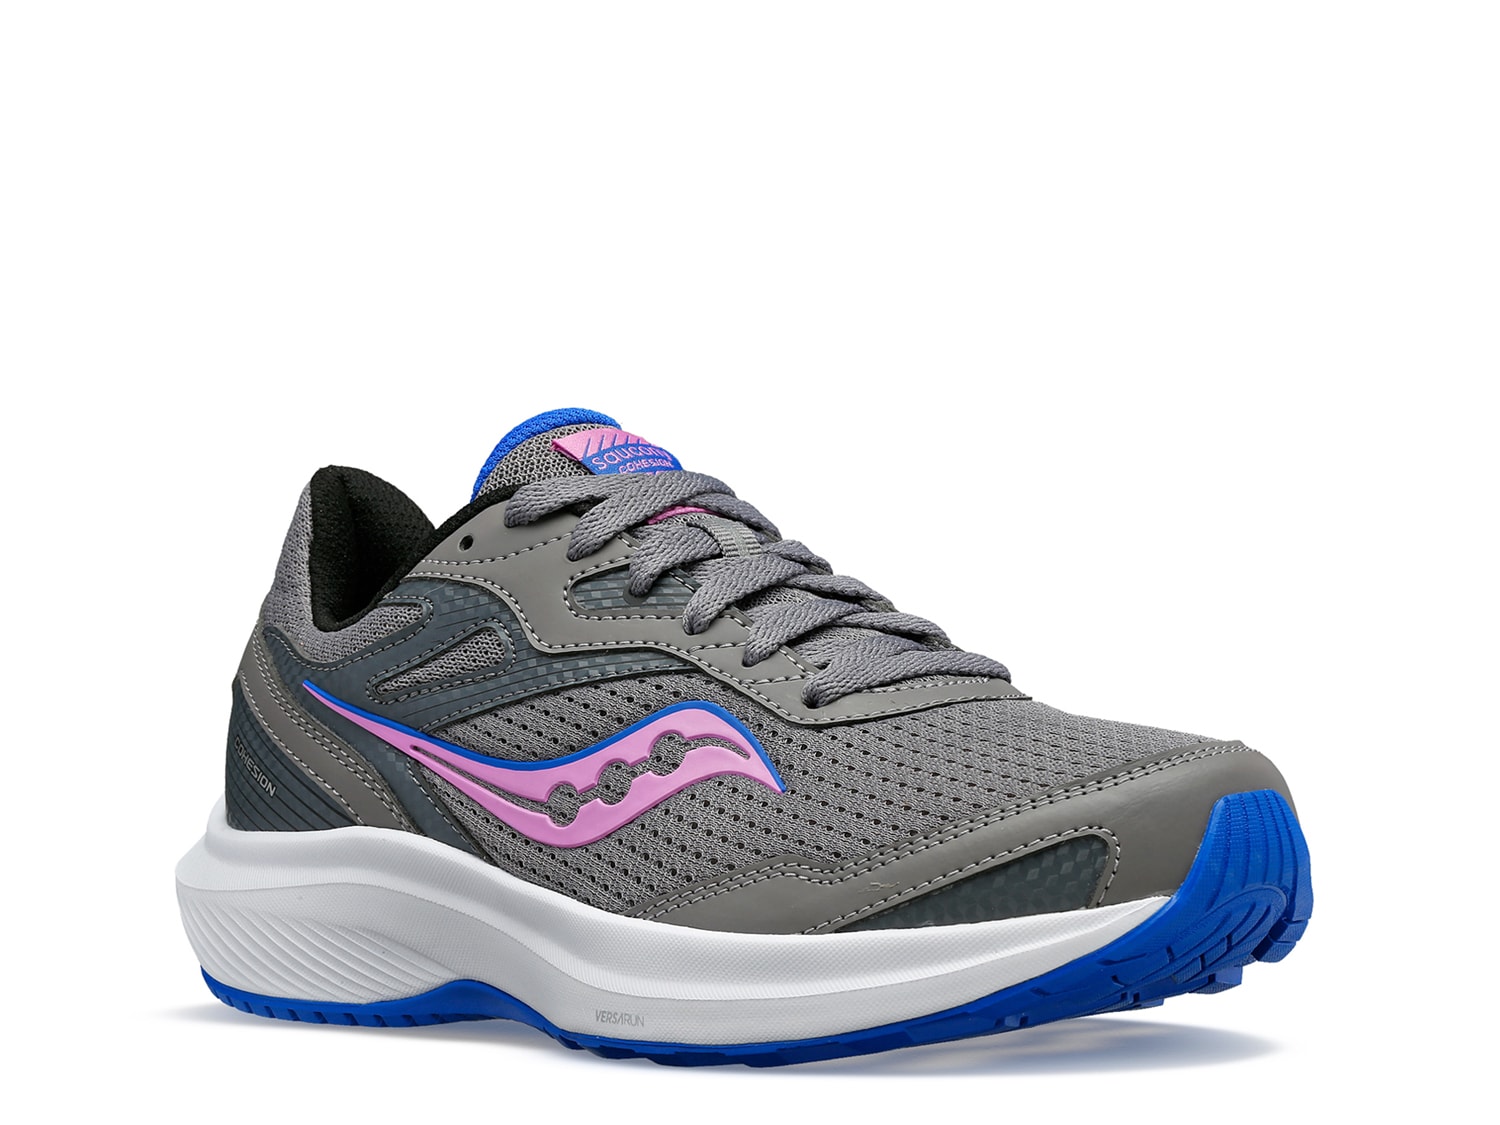 Saucony Cohesion 16 Running Shoe - Women's - Free Shipping